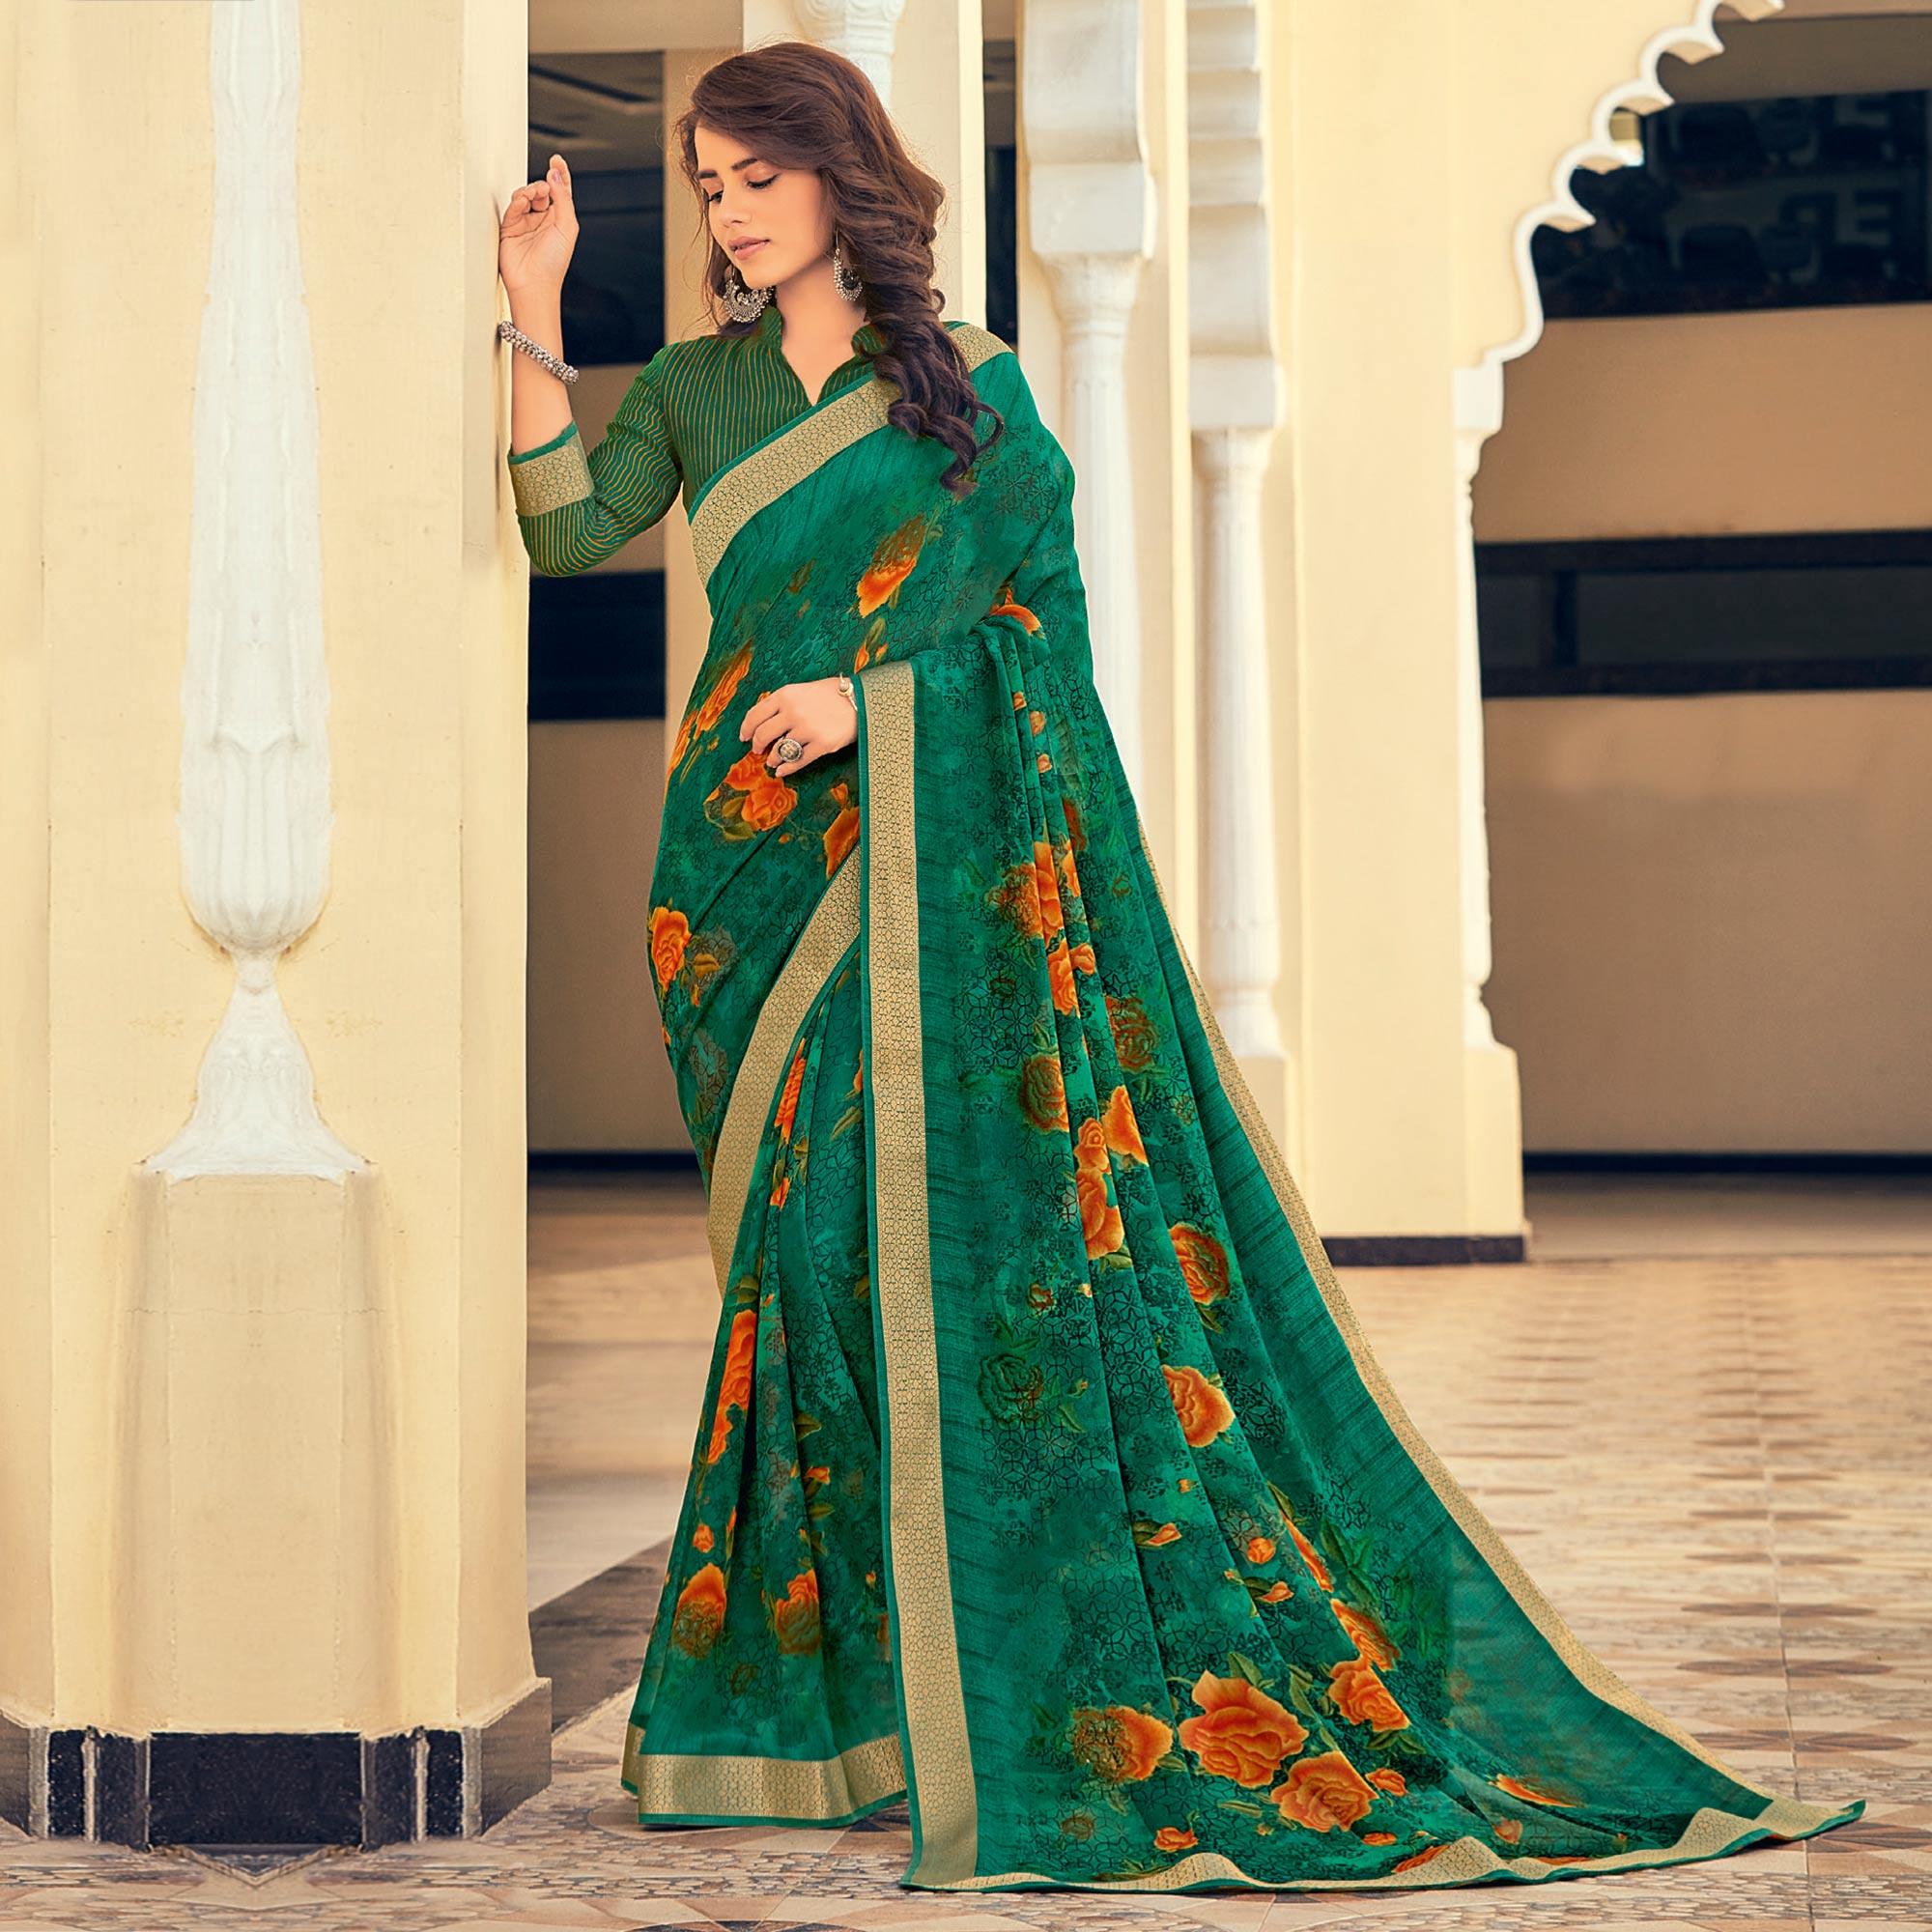 Bottle Green Casual Wear Printed Georgette Saree With Border - Peachmode